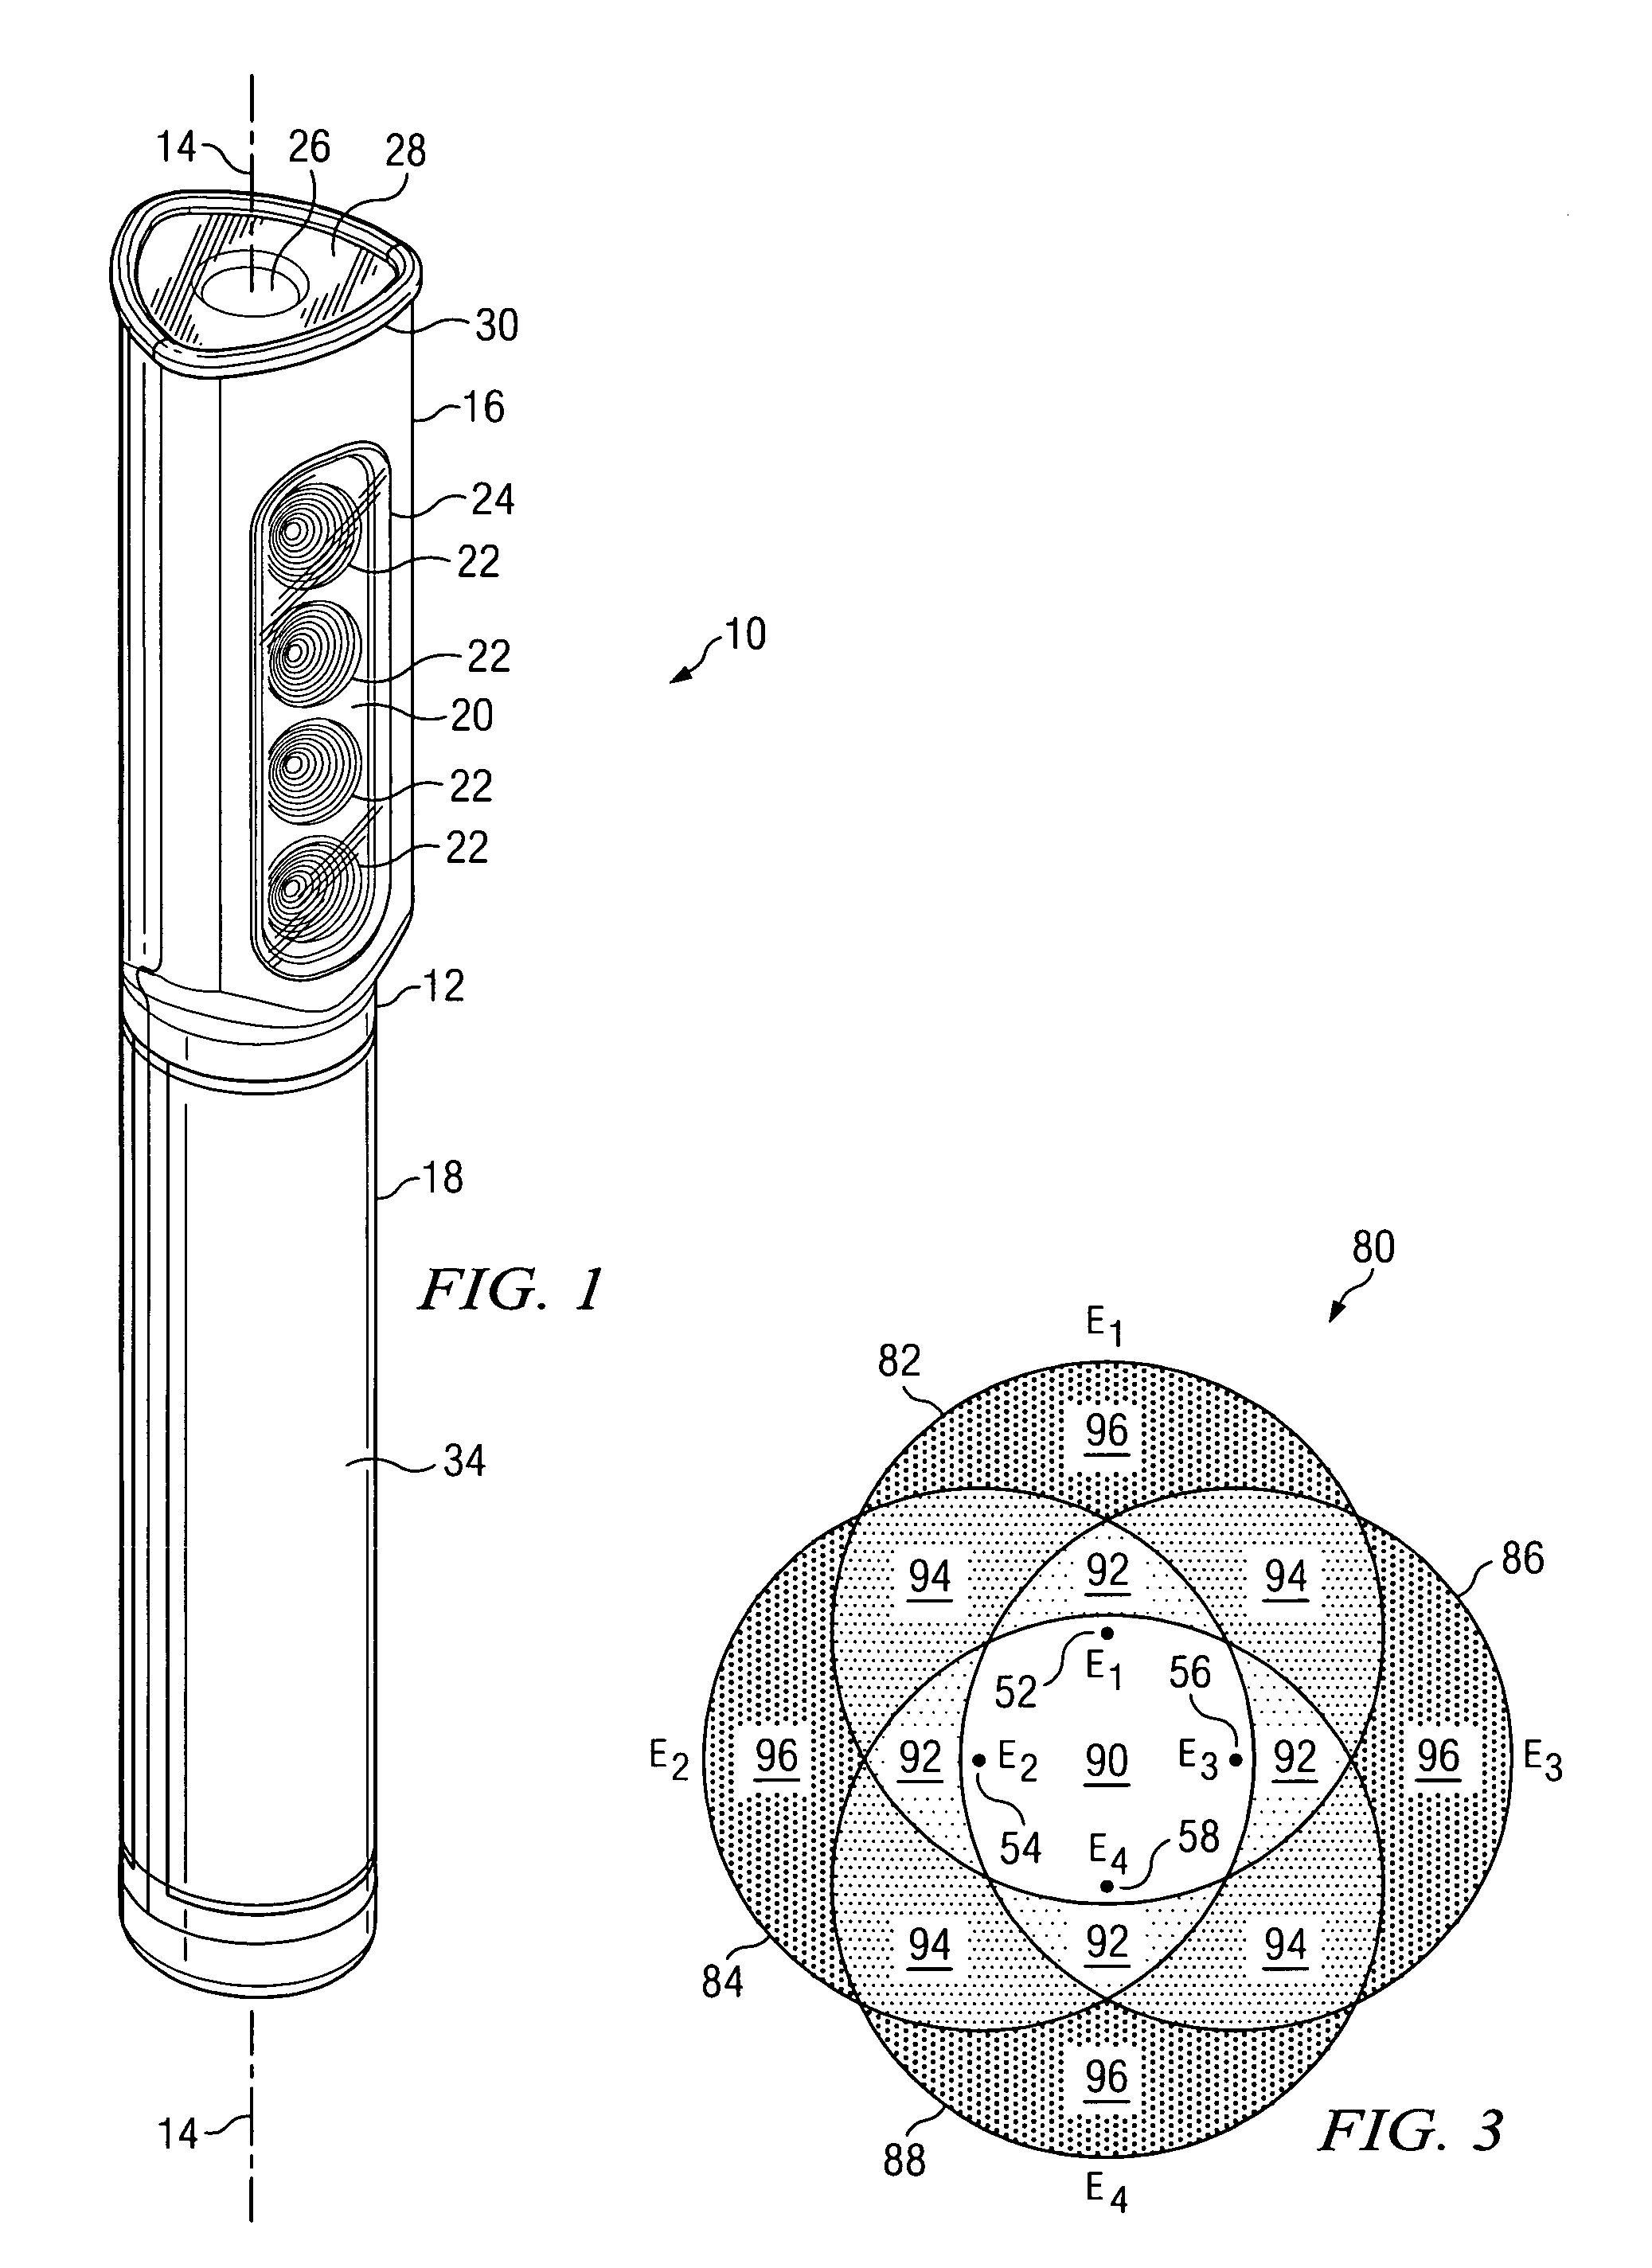 Lighting module assembly and method for a compact lighting device